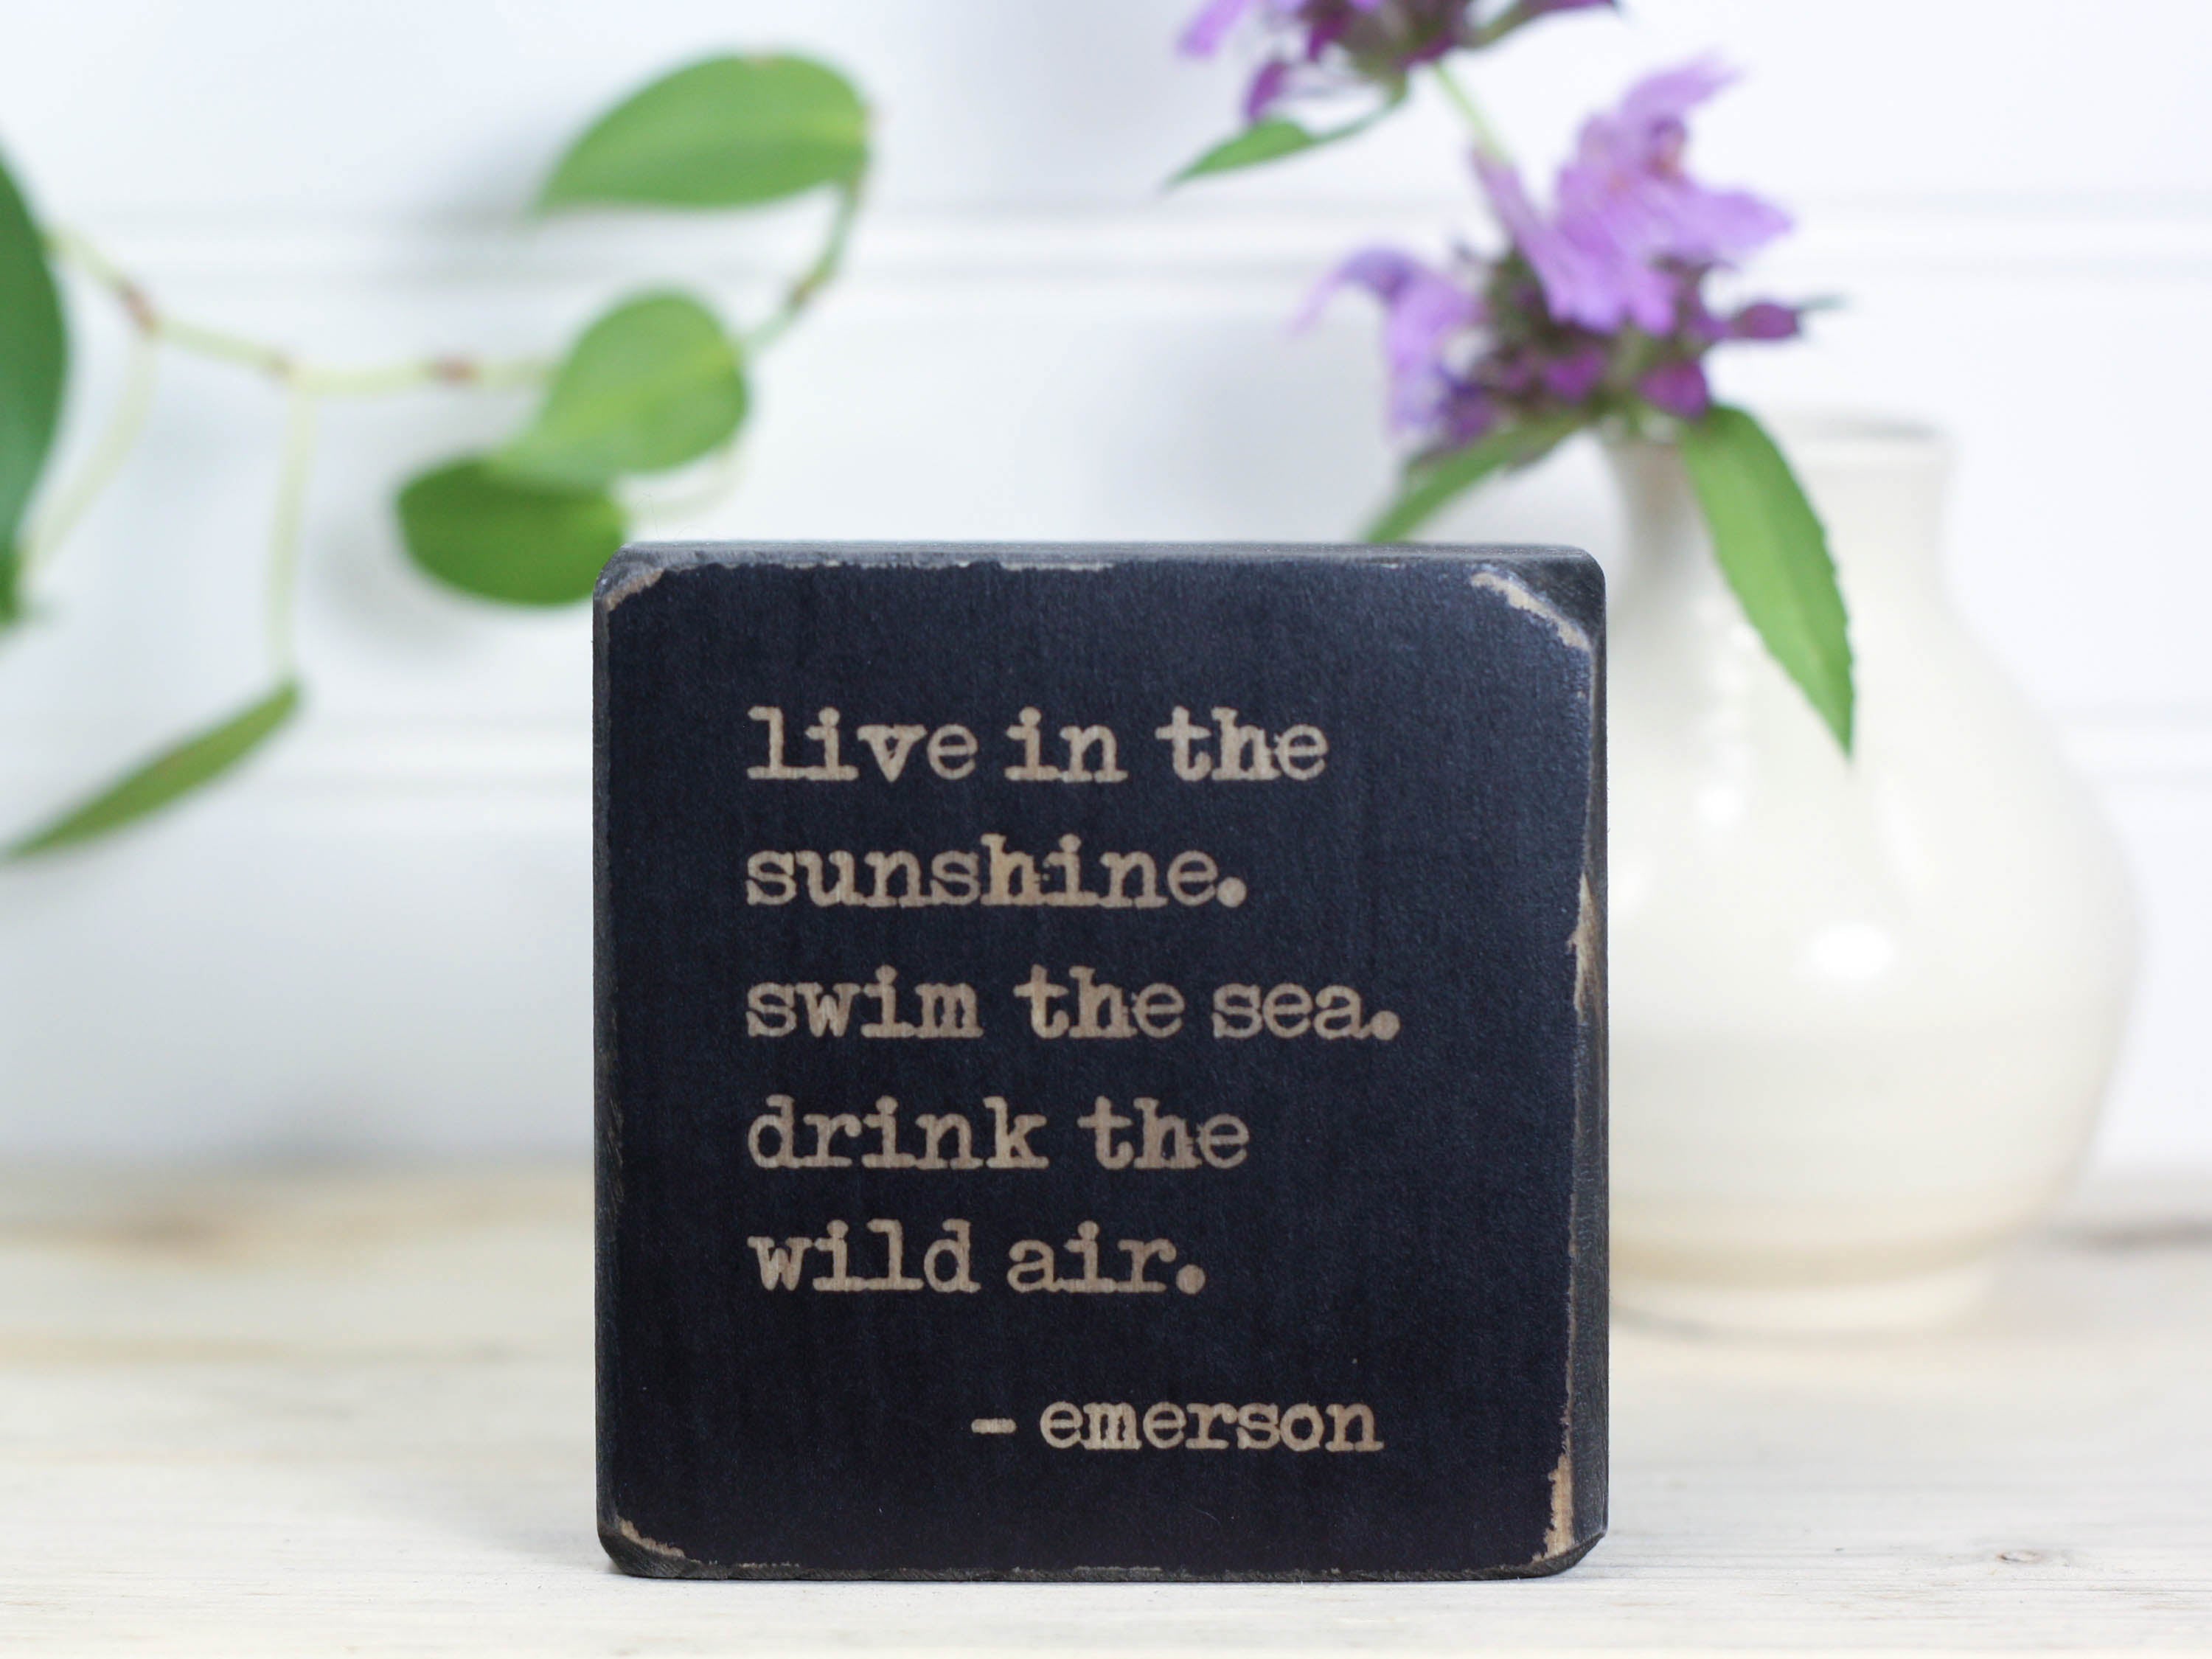 Mini wood decor in distressed black with the saying "Live in the sunshine. swim in the sea. drink the wild air. - emerson"